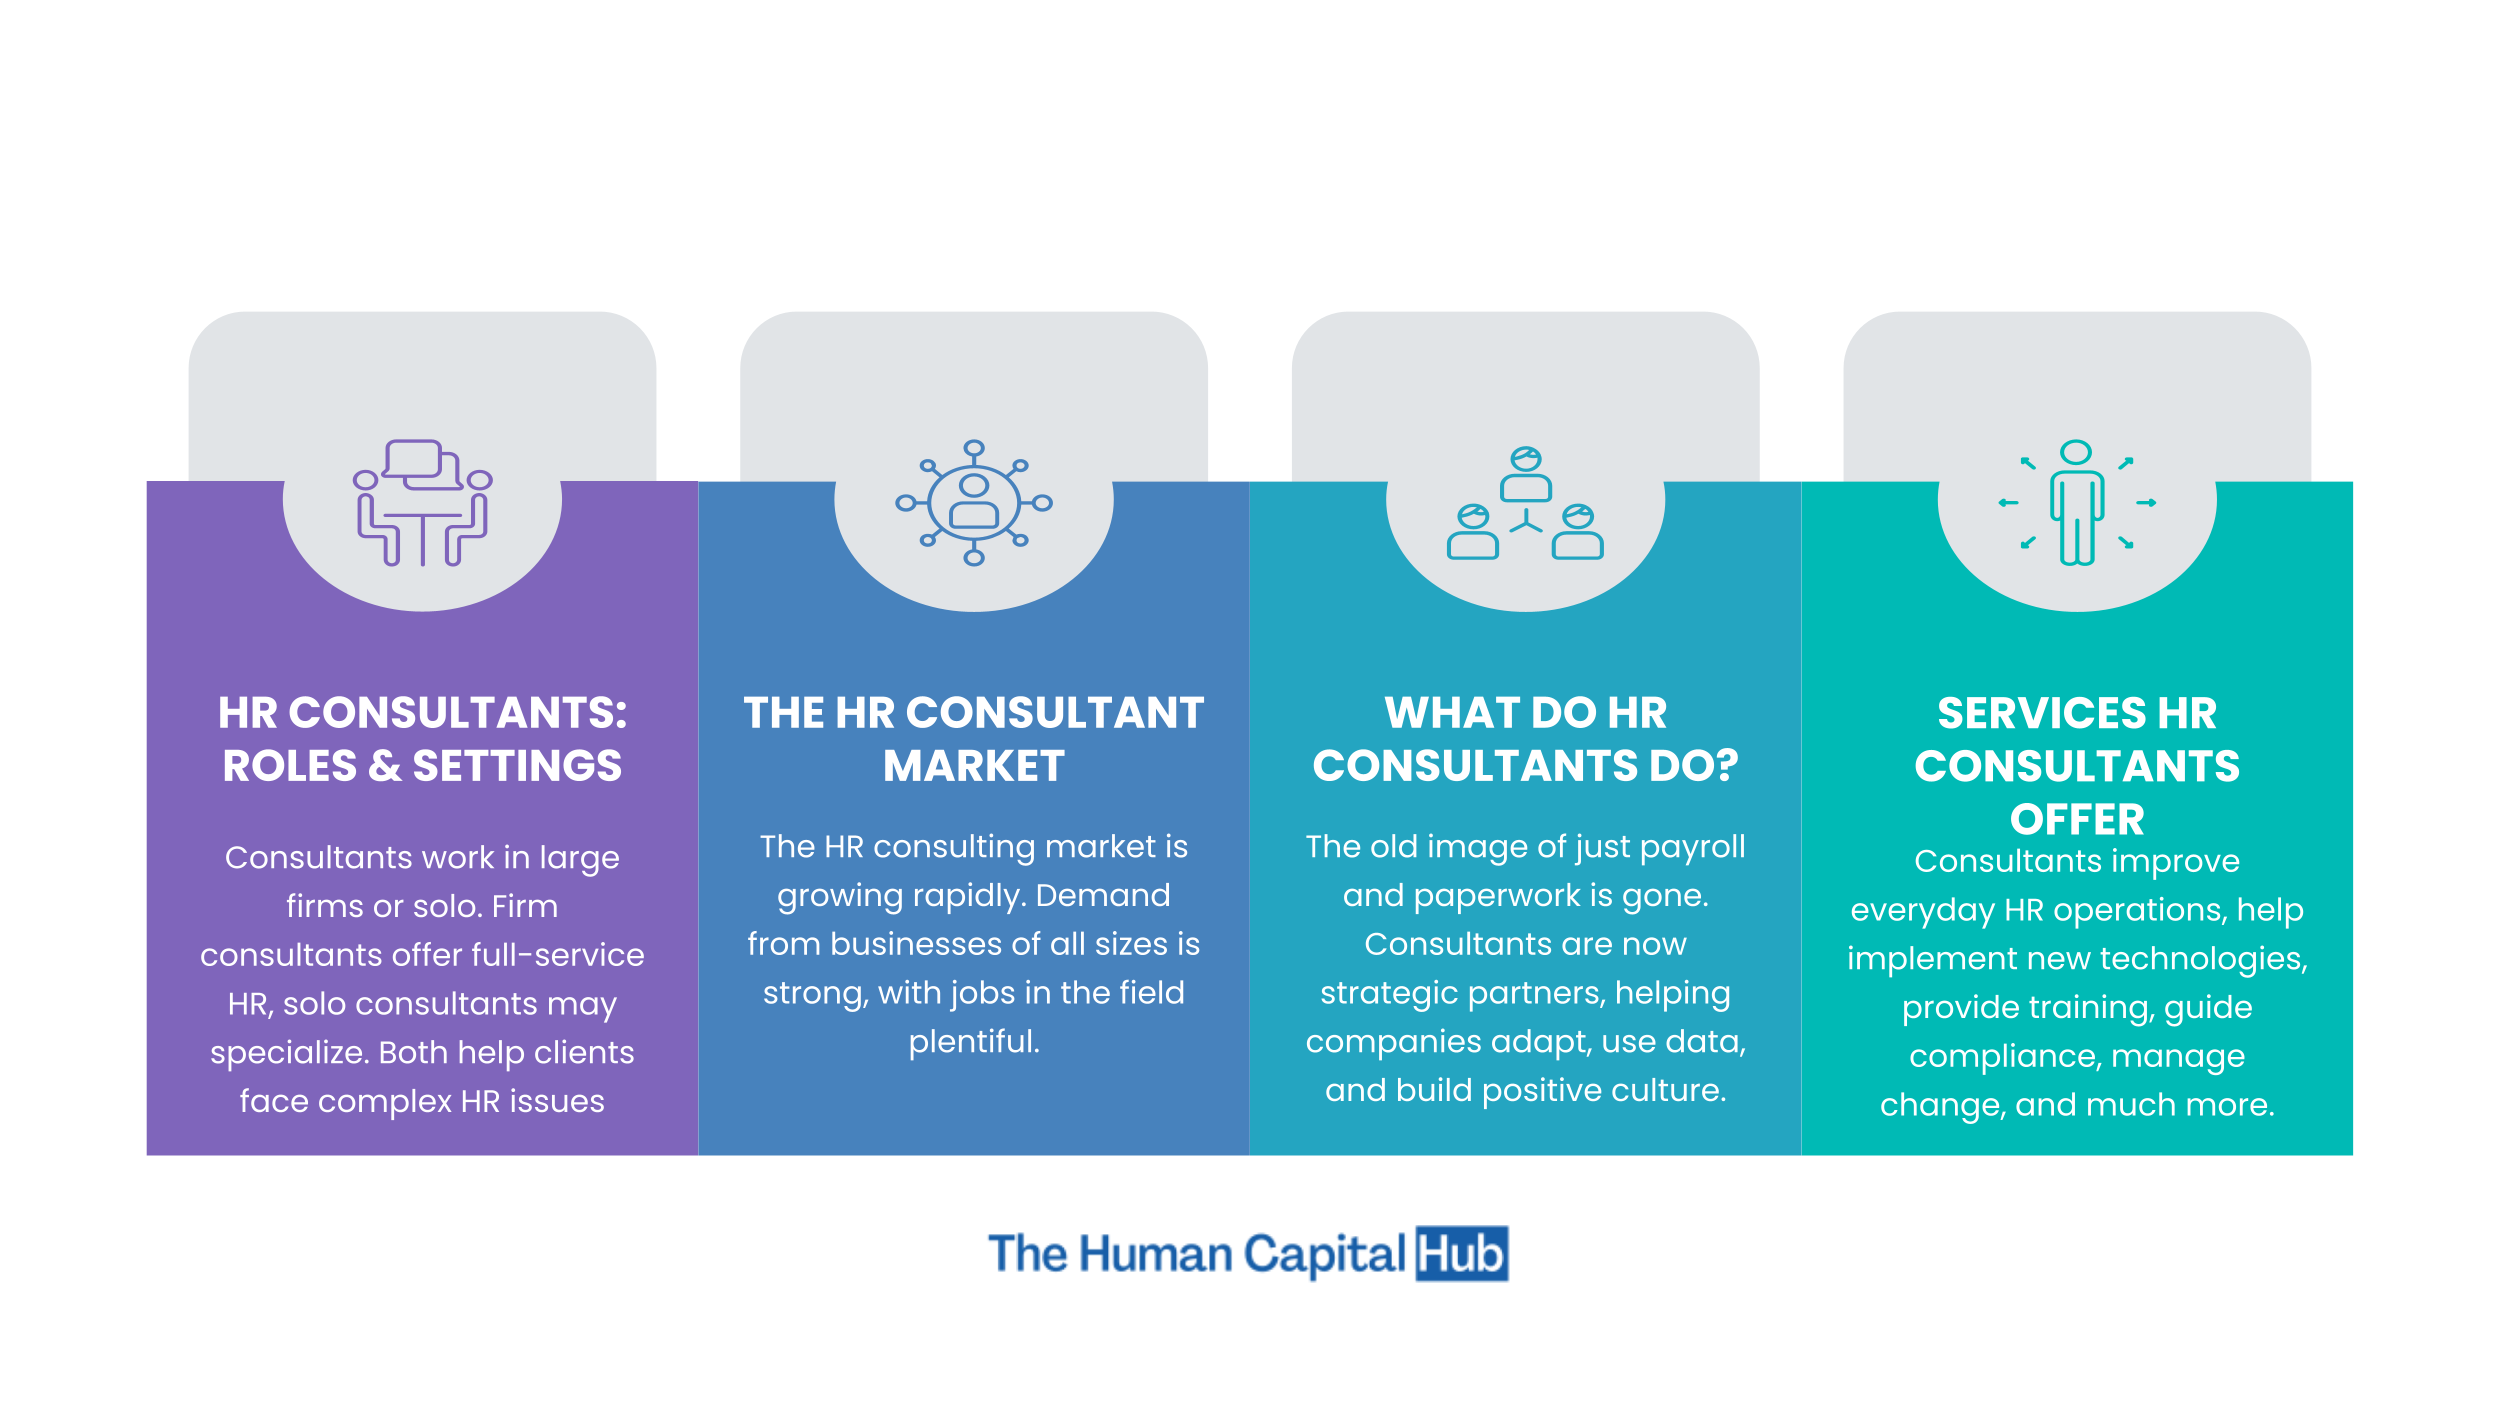 What does an HR Consultant do?